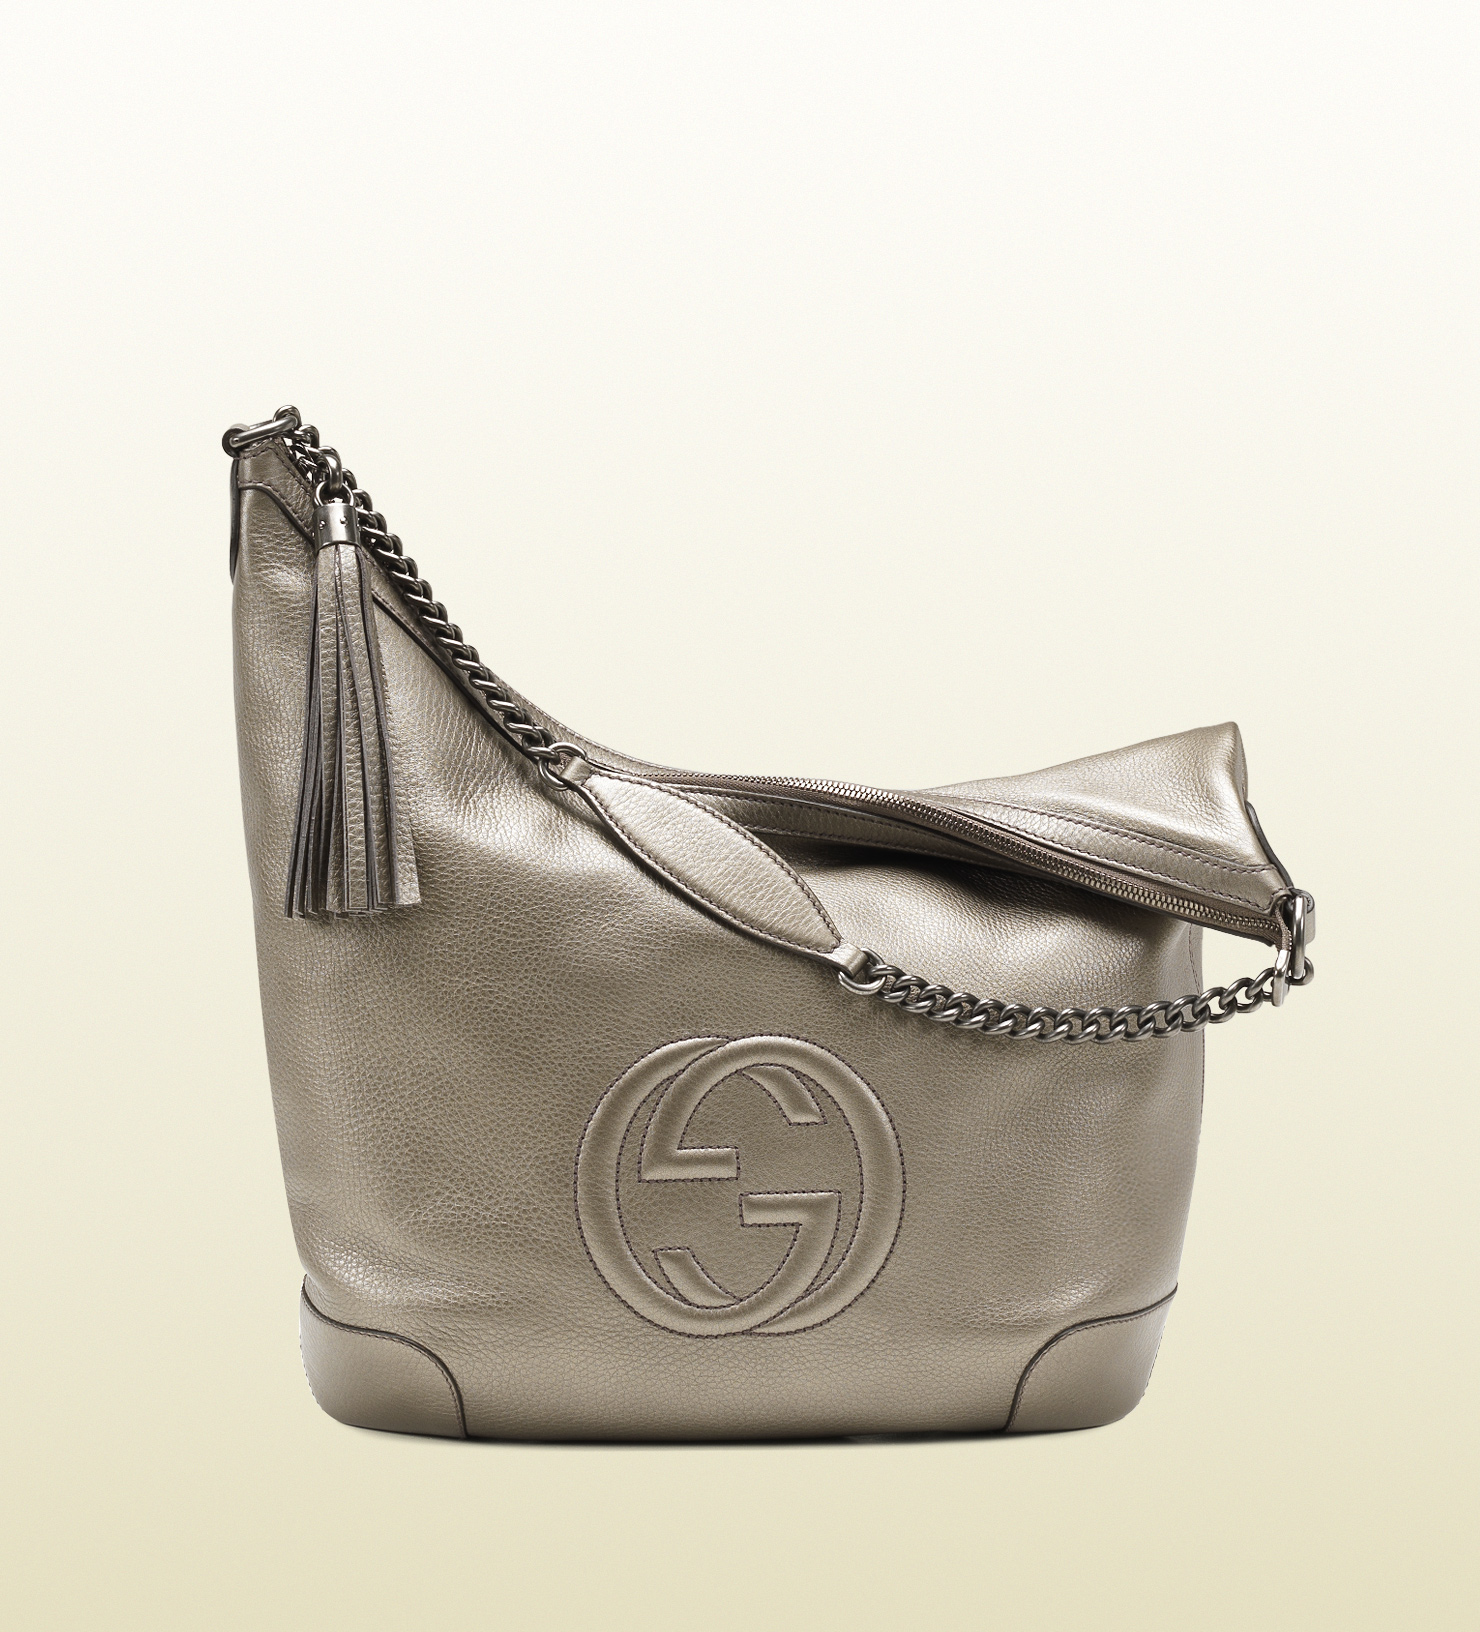 Gucci Soho Metallic Leather Chain Shoulder Bag in Gray | Lyst